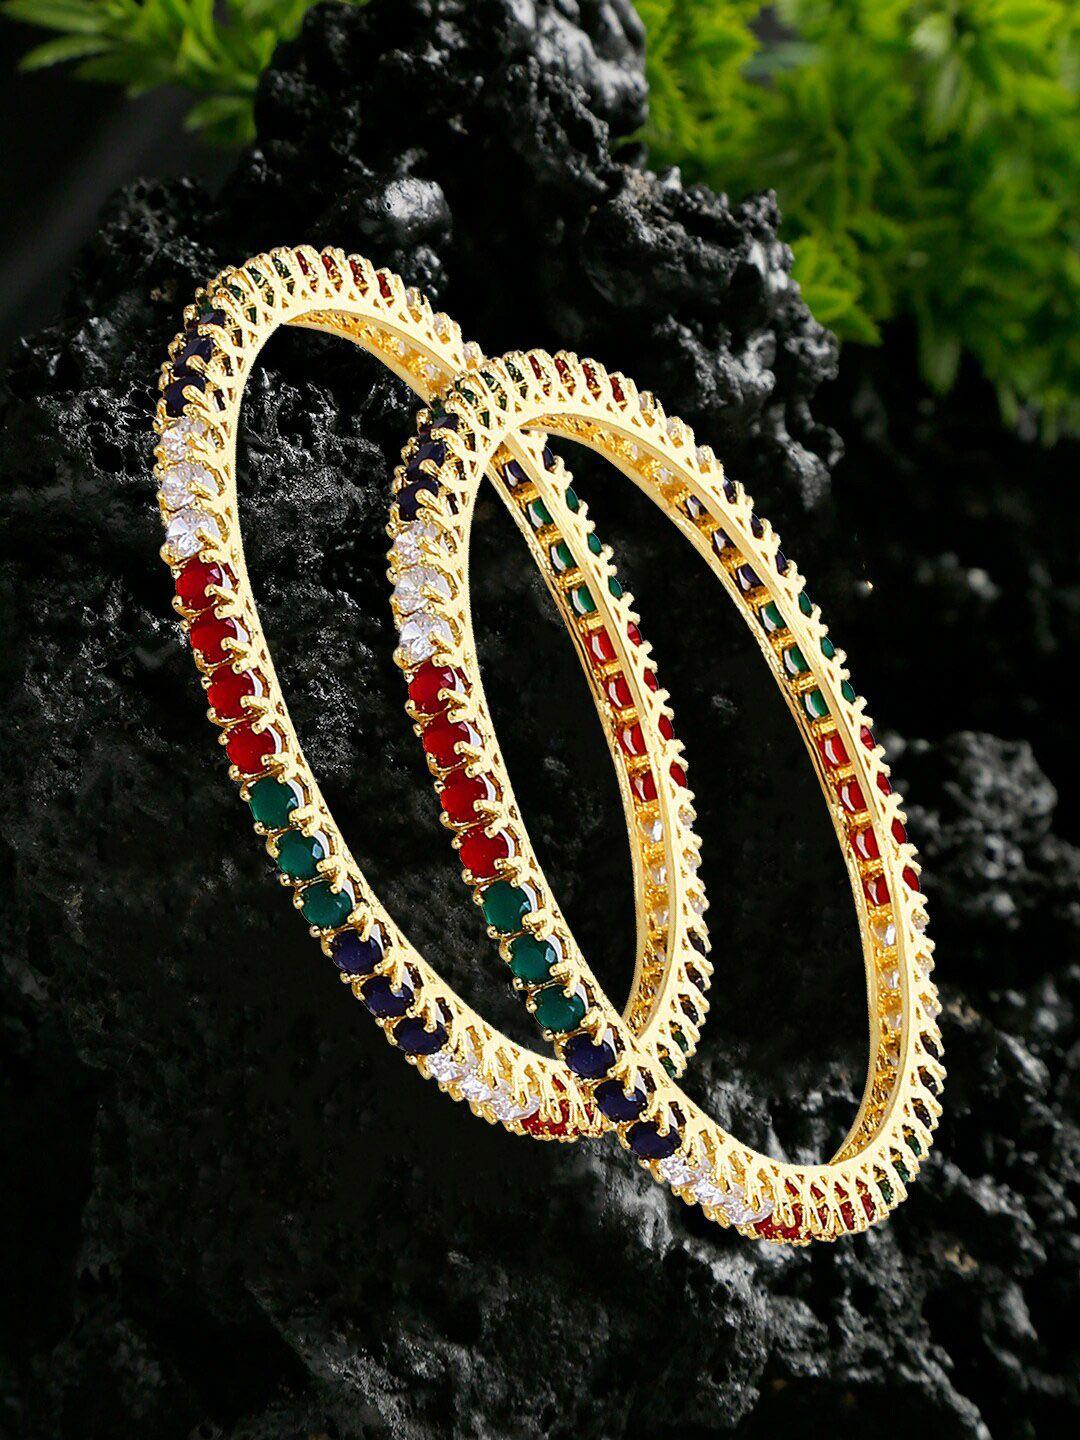 youbella set of 2 gold-plated stone-studded bangles